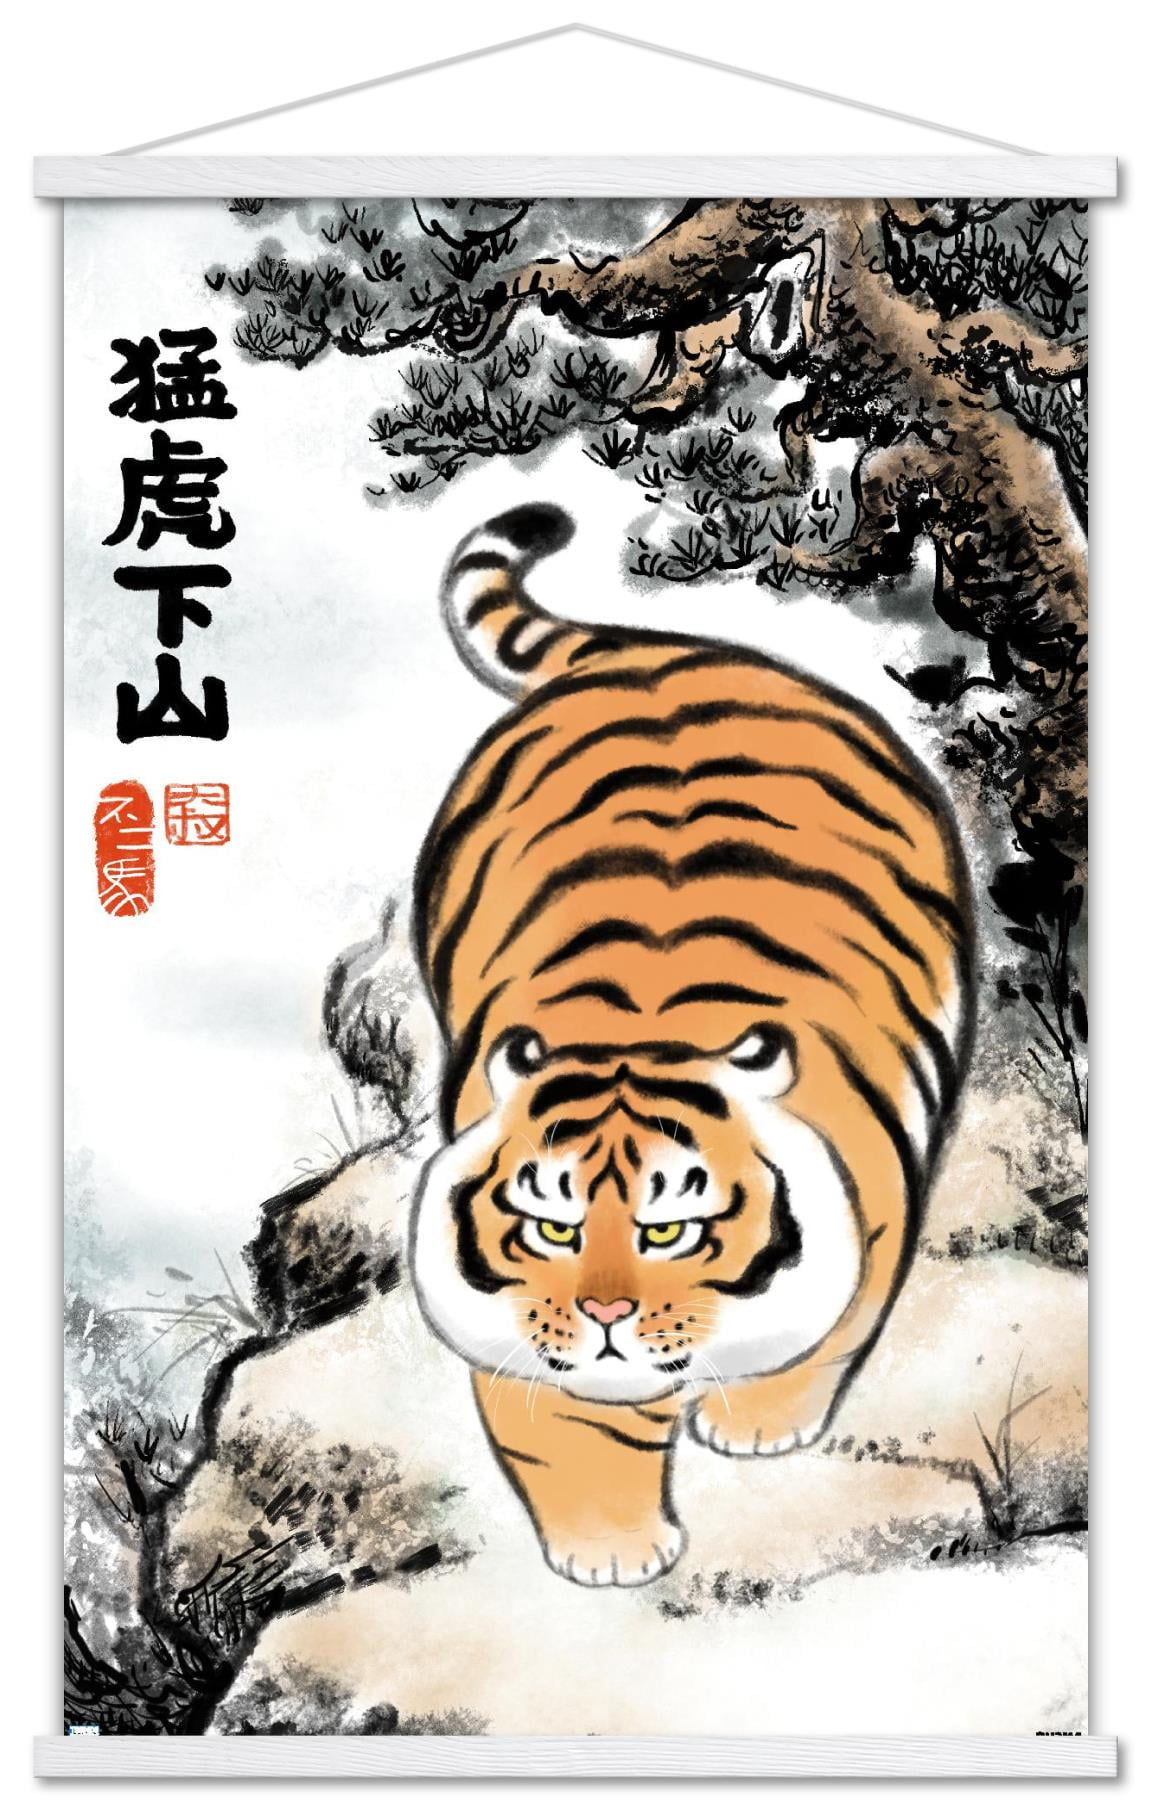 Tiger Personalized Giant Coloring Poster 48x63